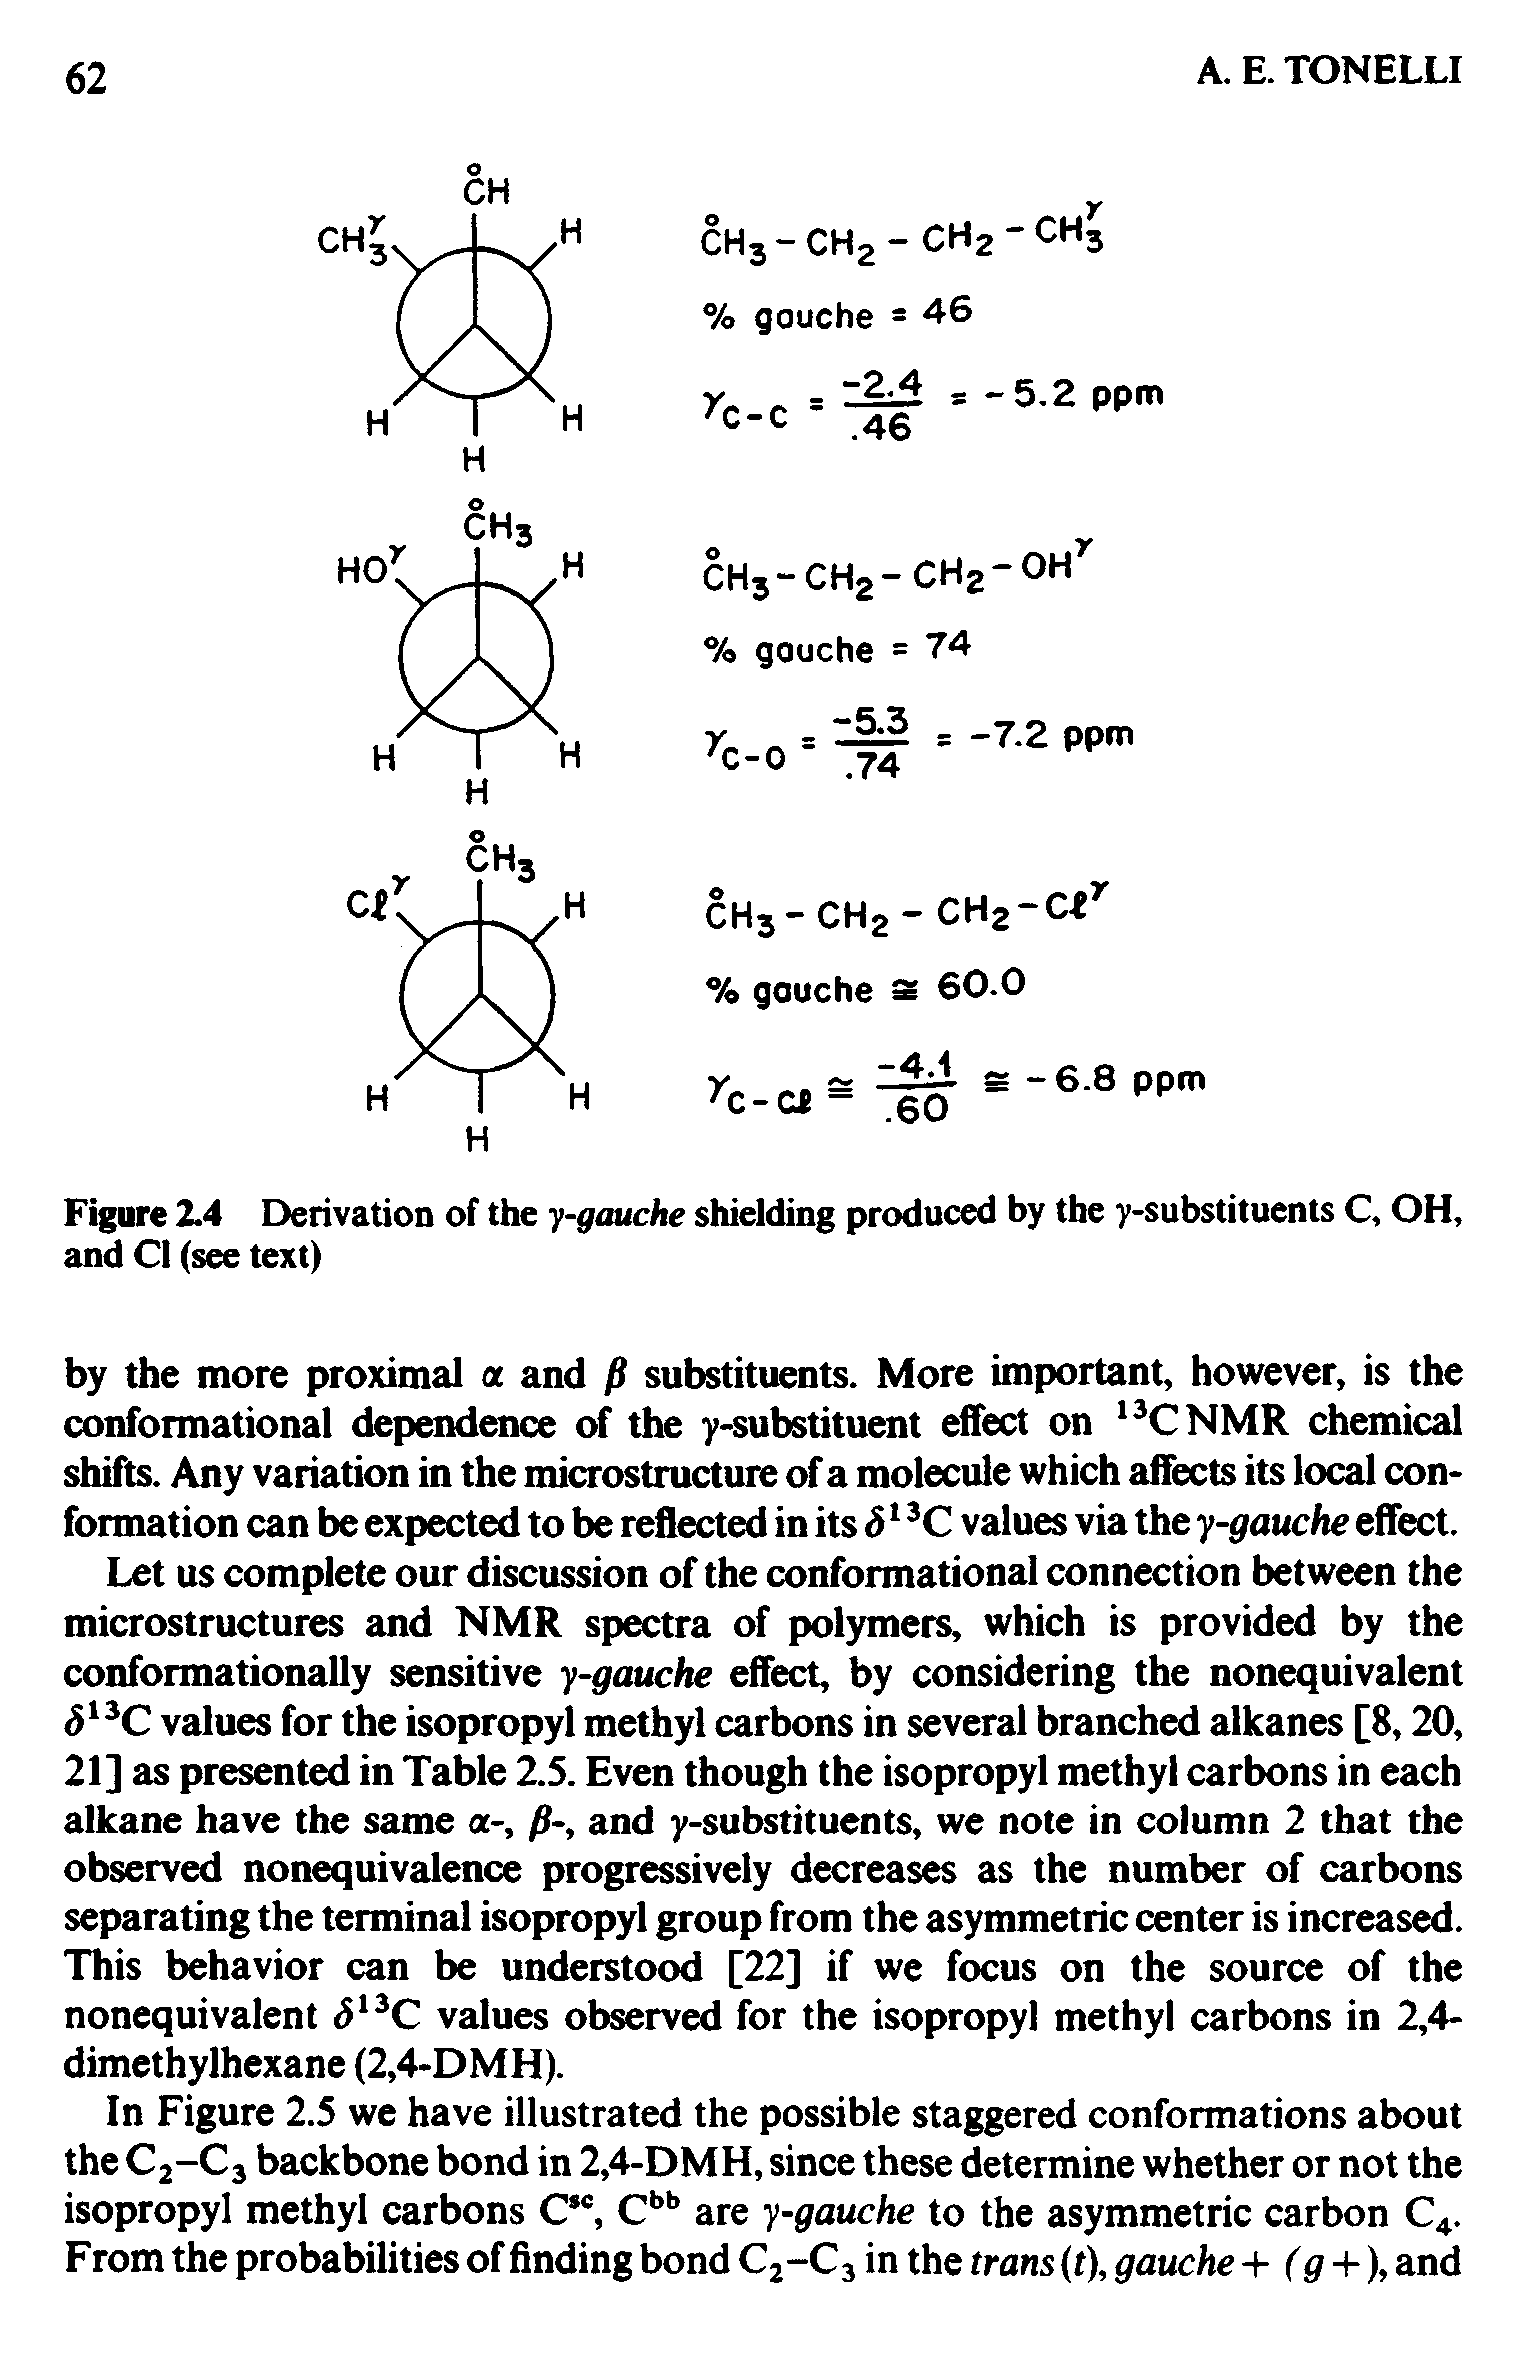 Figure Z4 Derivation of the y-gauche shielding produced by the y-substituents C, OH, and Cl (see text)...